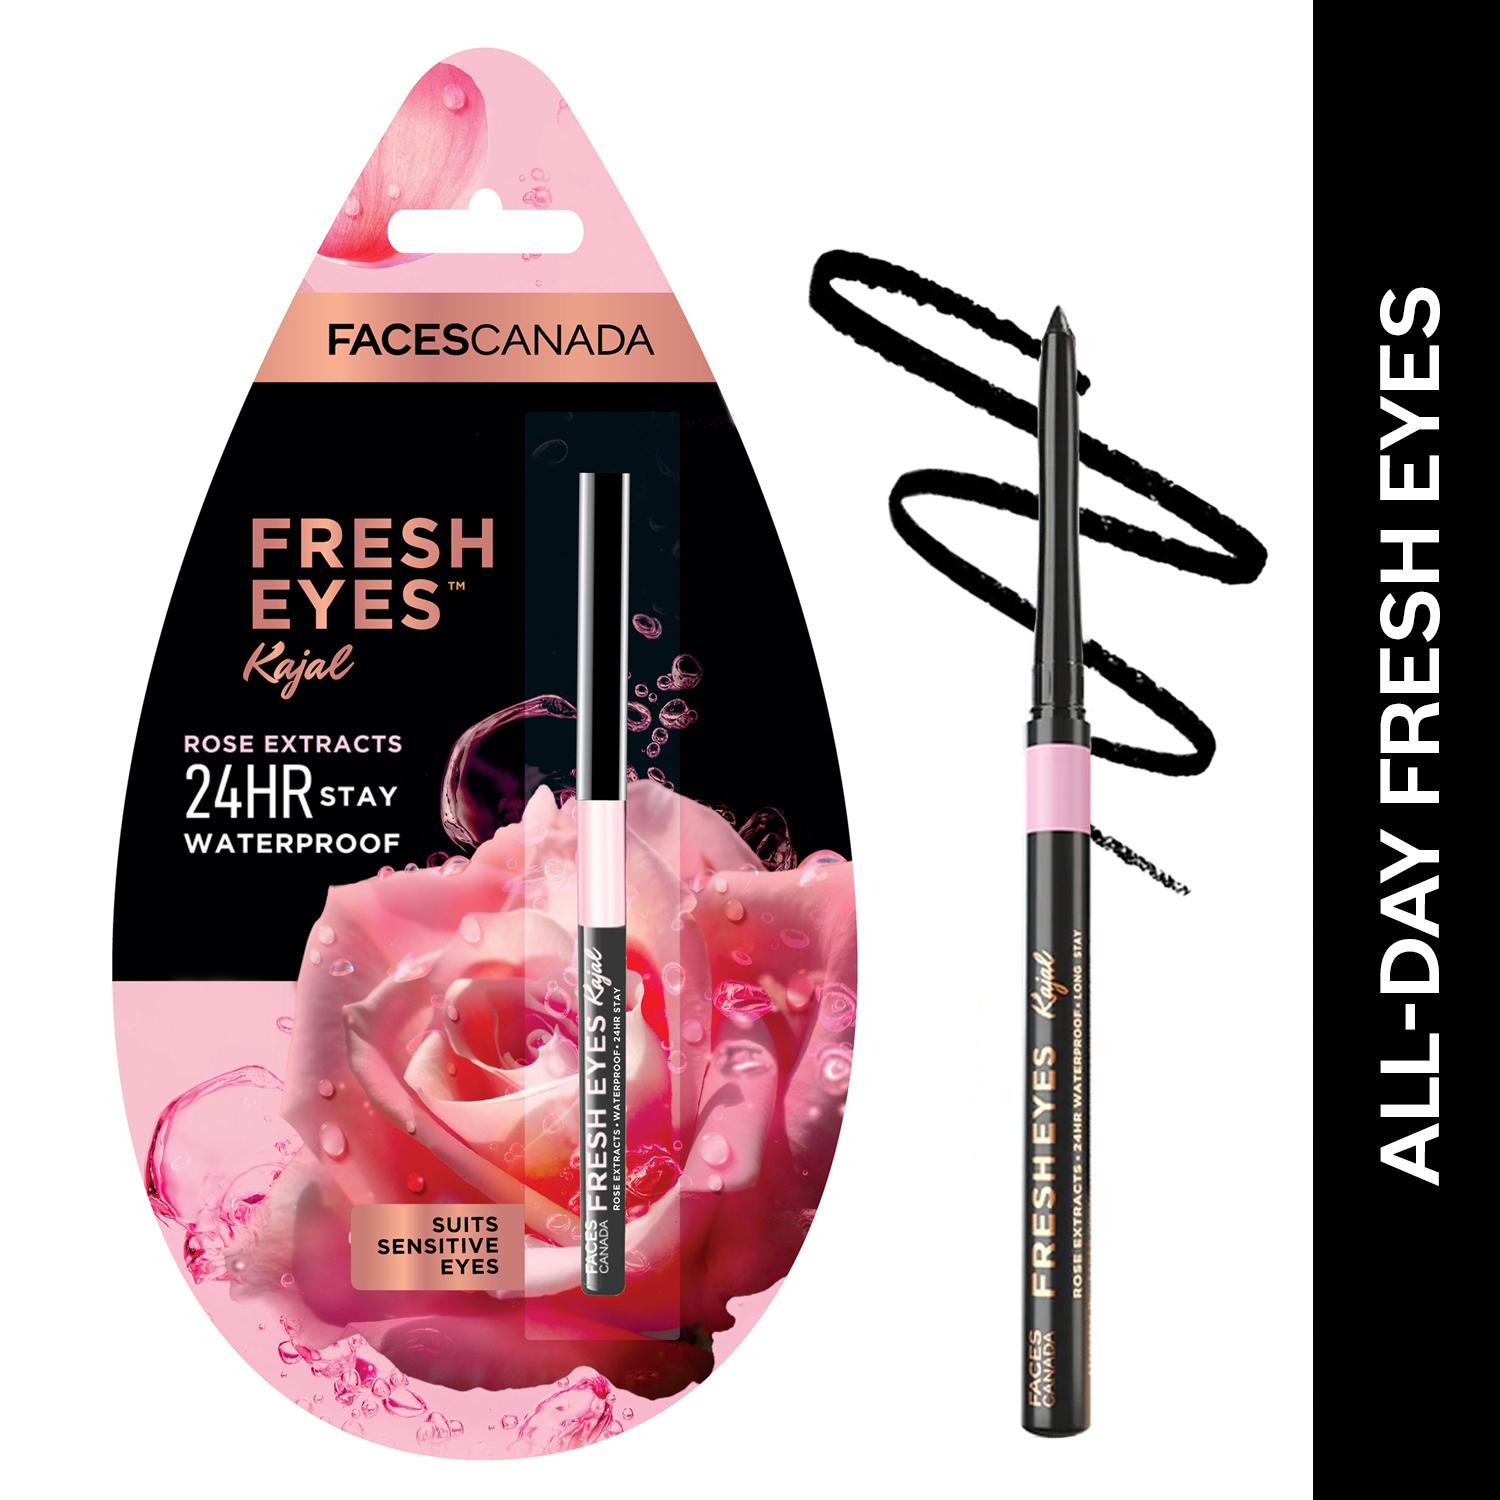 Faces Canada | Faces Canada Fresh Eyes Kajal, 24HR Waterproof, Rose Extract, Soothes & Cools,Gentle, Vegan -(0.35 g)